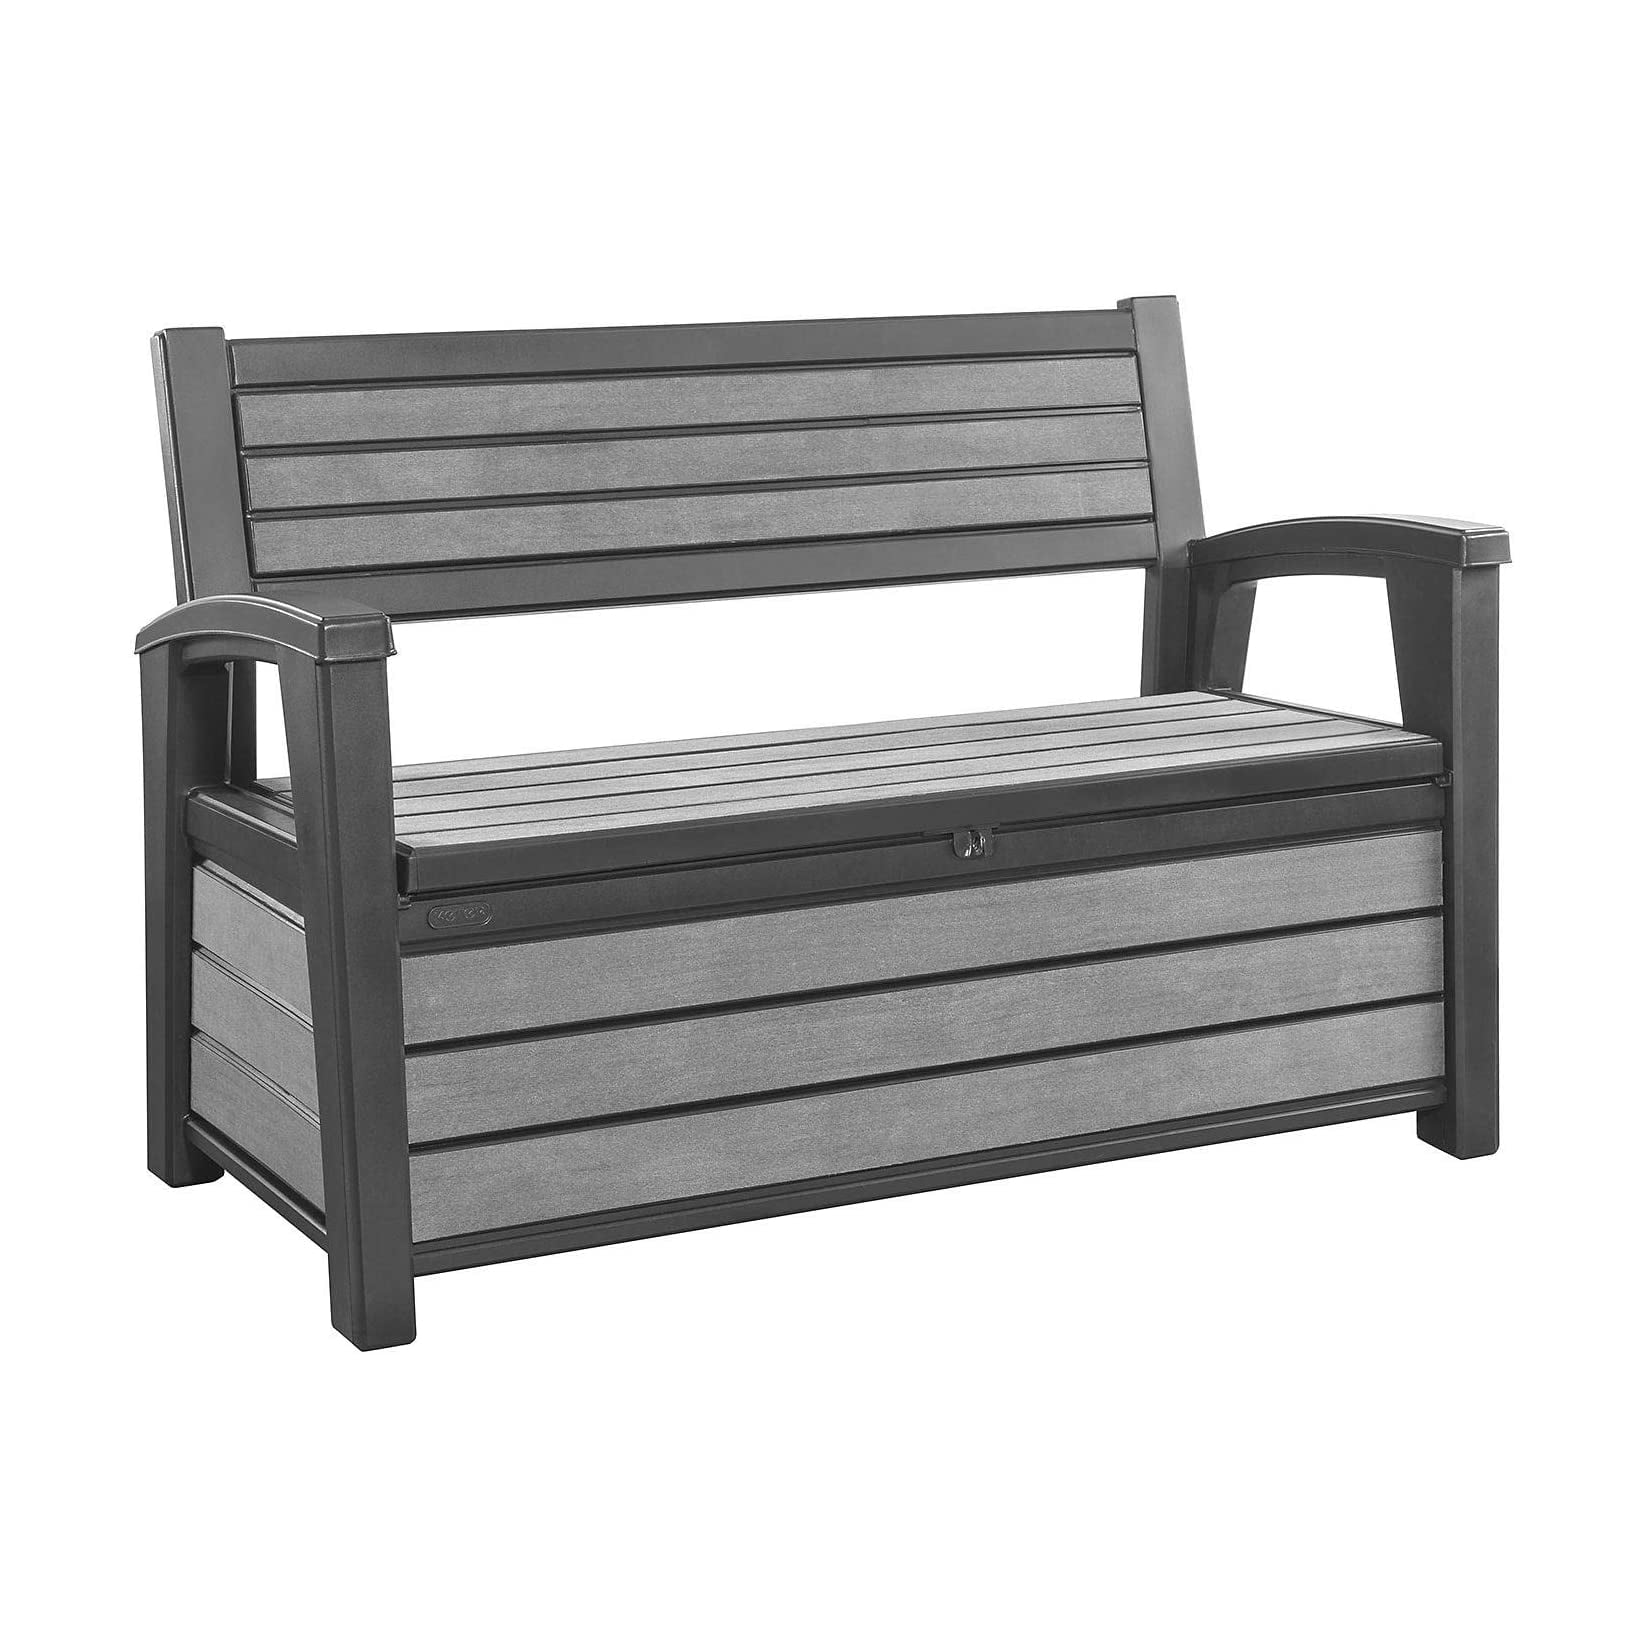 Keter Hudson 60 Gal Plastic Outdoor, White Outdoor Patio Bench With Storage